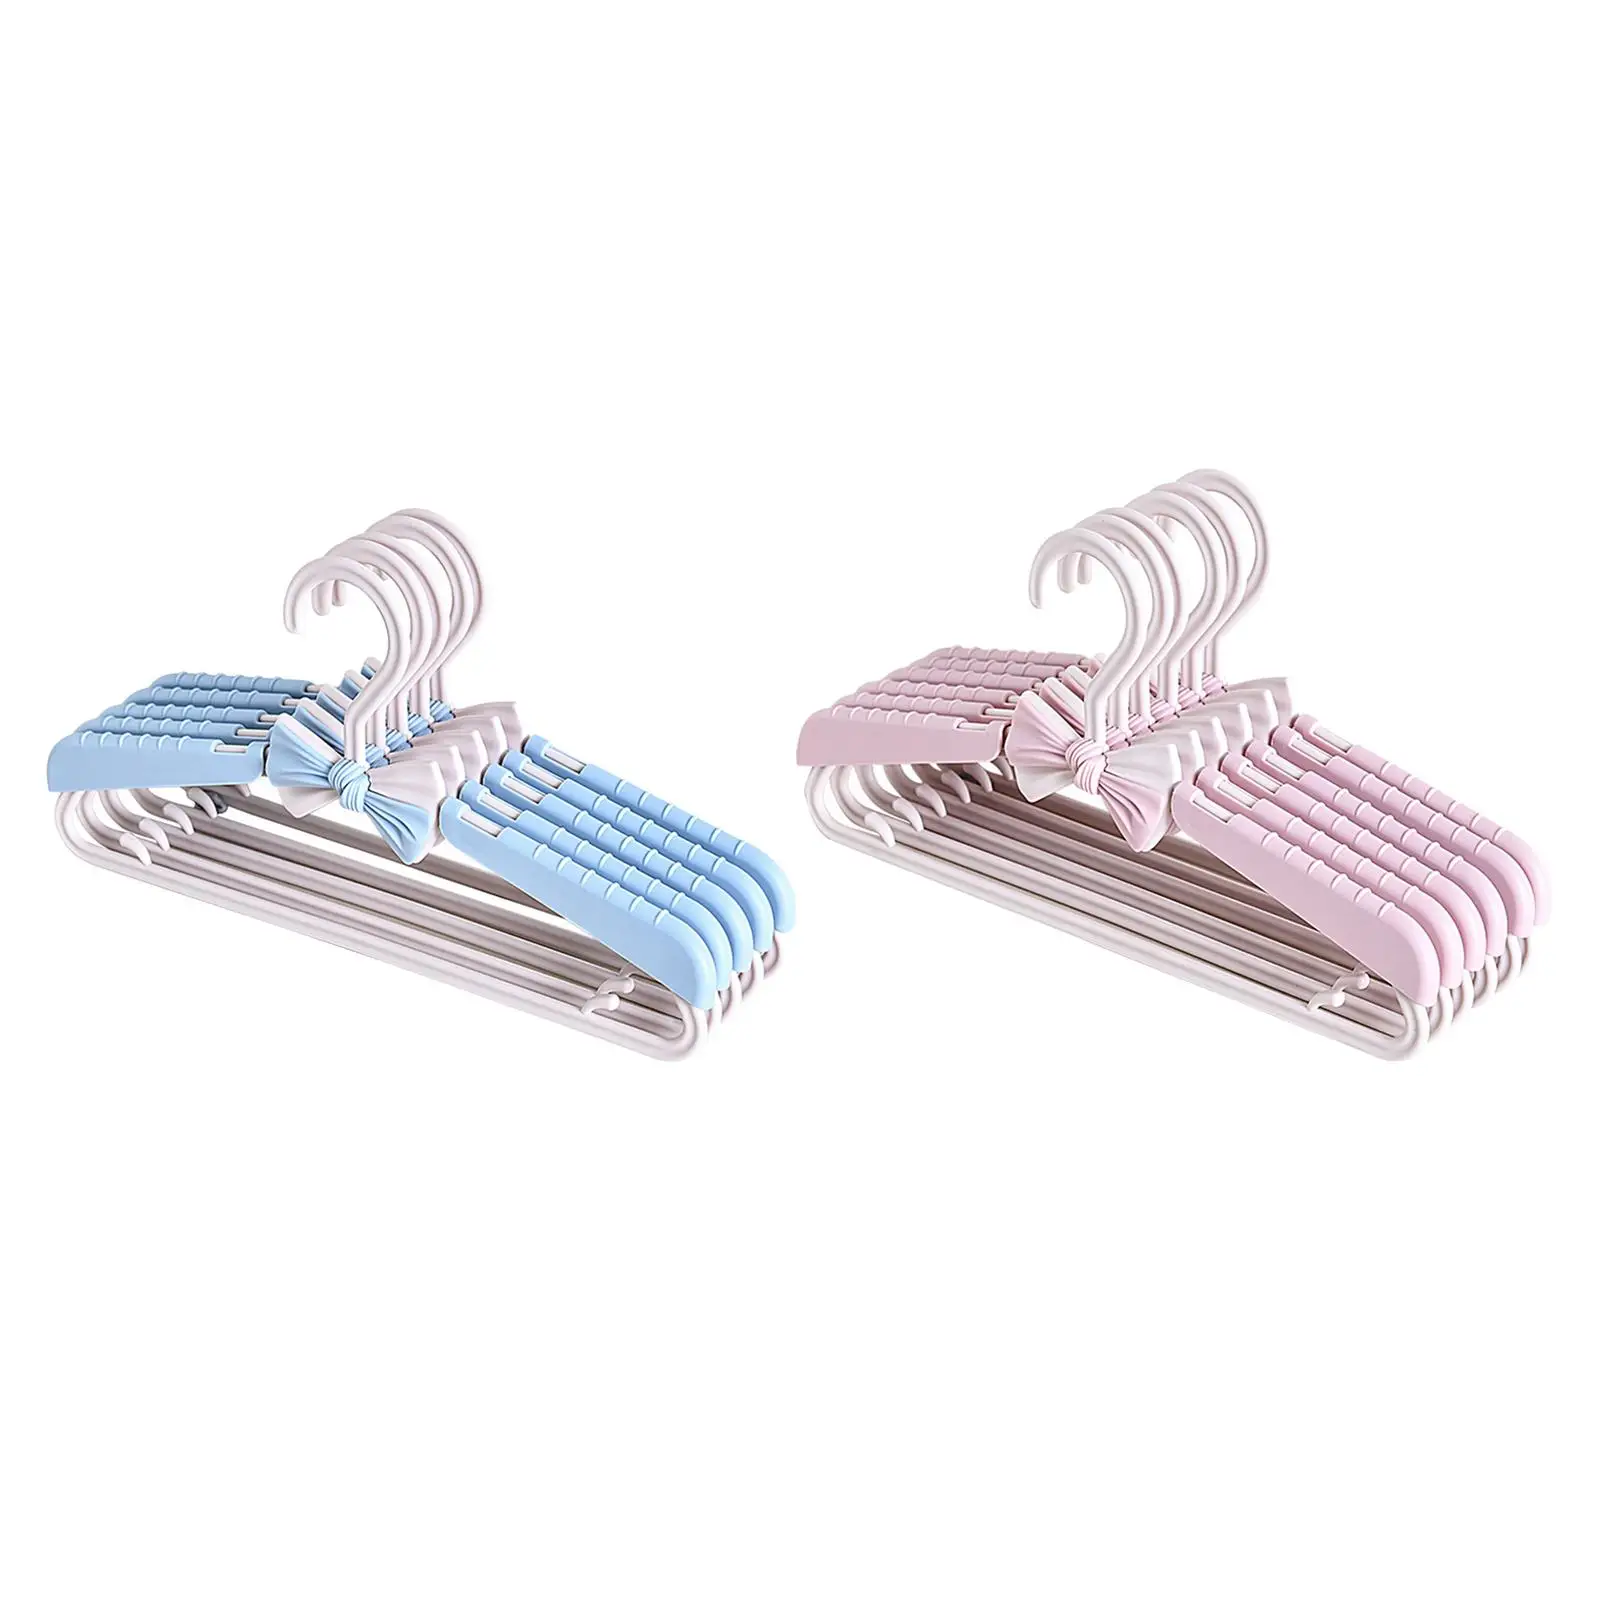 Non Slip Telescopic Closet Hanger Extendable Clothes Hangers Clothes Drying Rack Adjustable Kid Hanger for Trousers Jeans Scarf